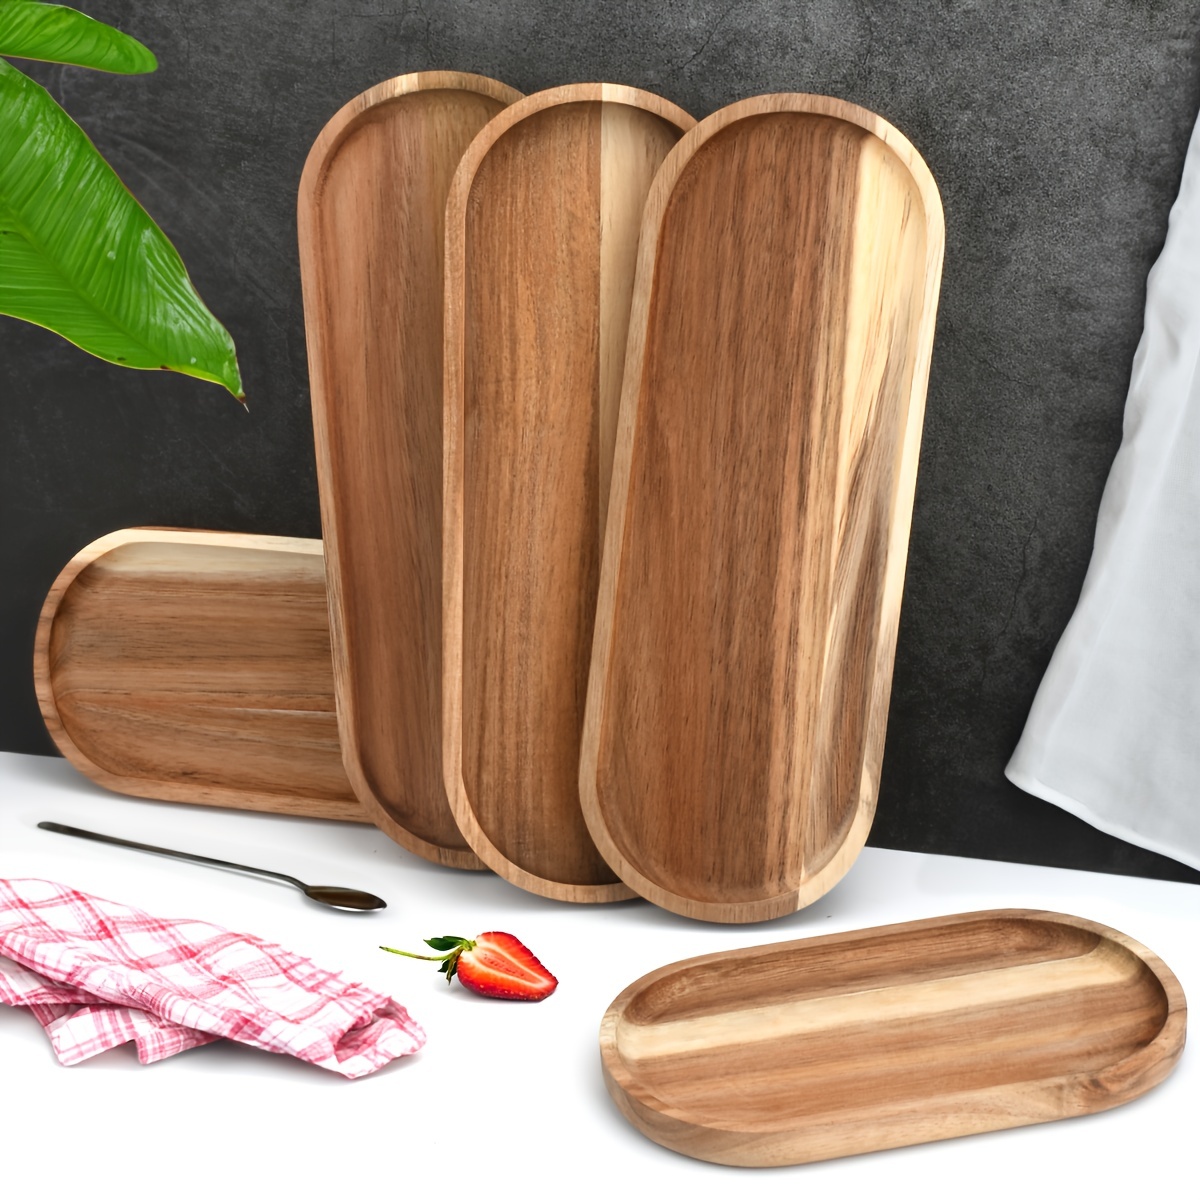 Wooden Living - Serving Tray/Wooden Trays with Handles and Small Wood Boxes Set (Unfinished) | for Montessori Activity, Art/Crafts, Painting, Restaura